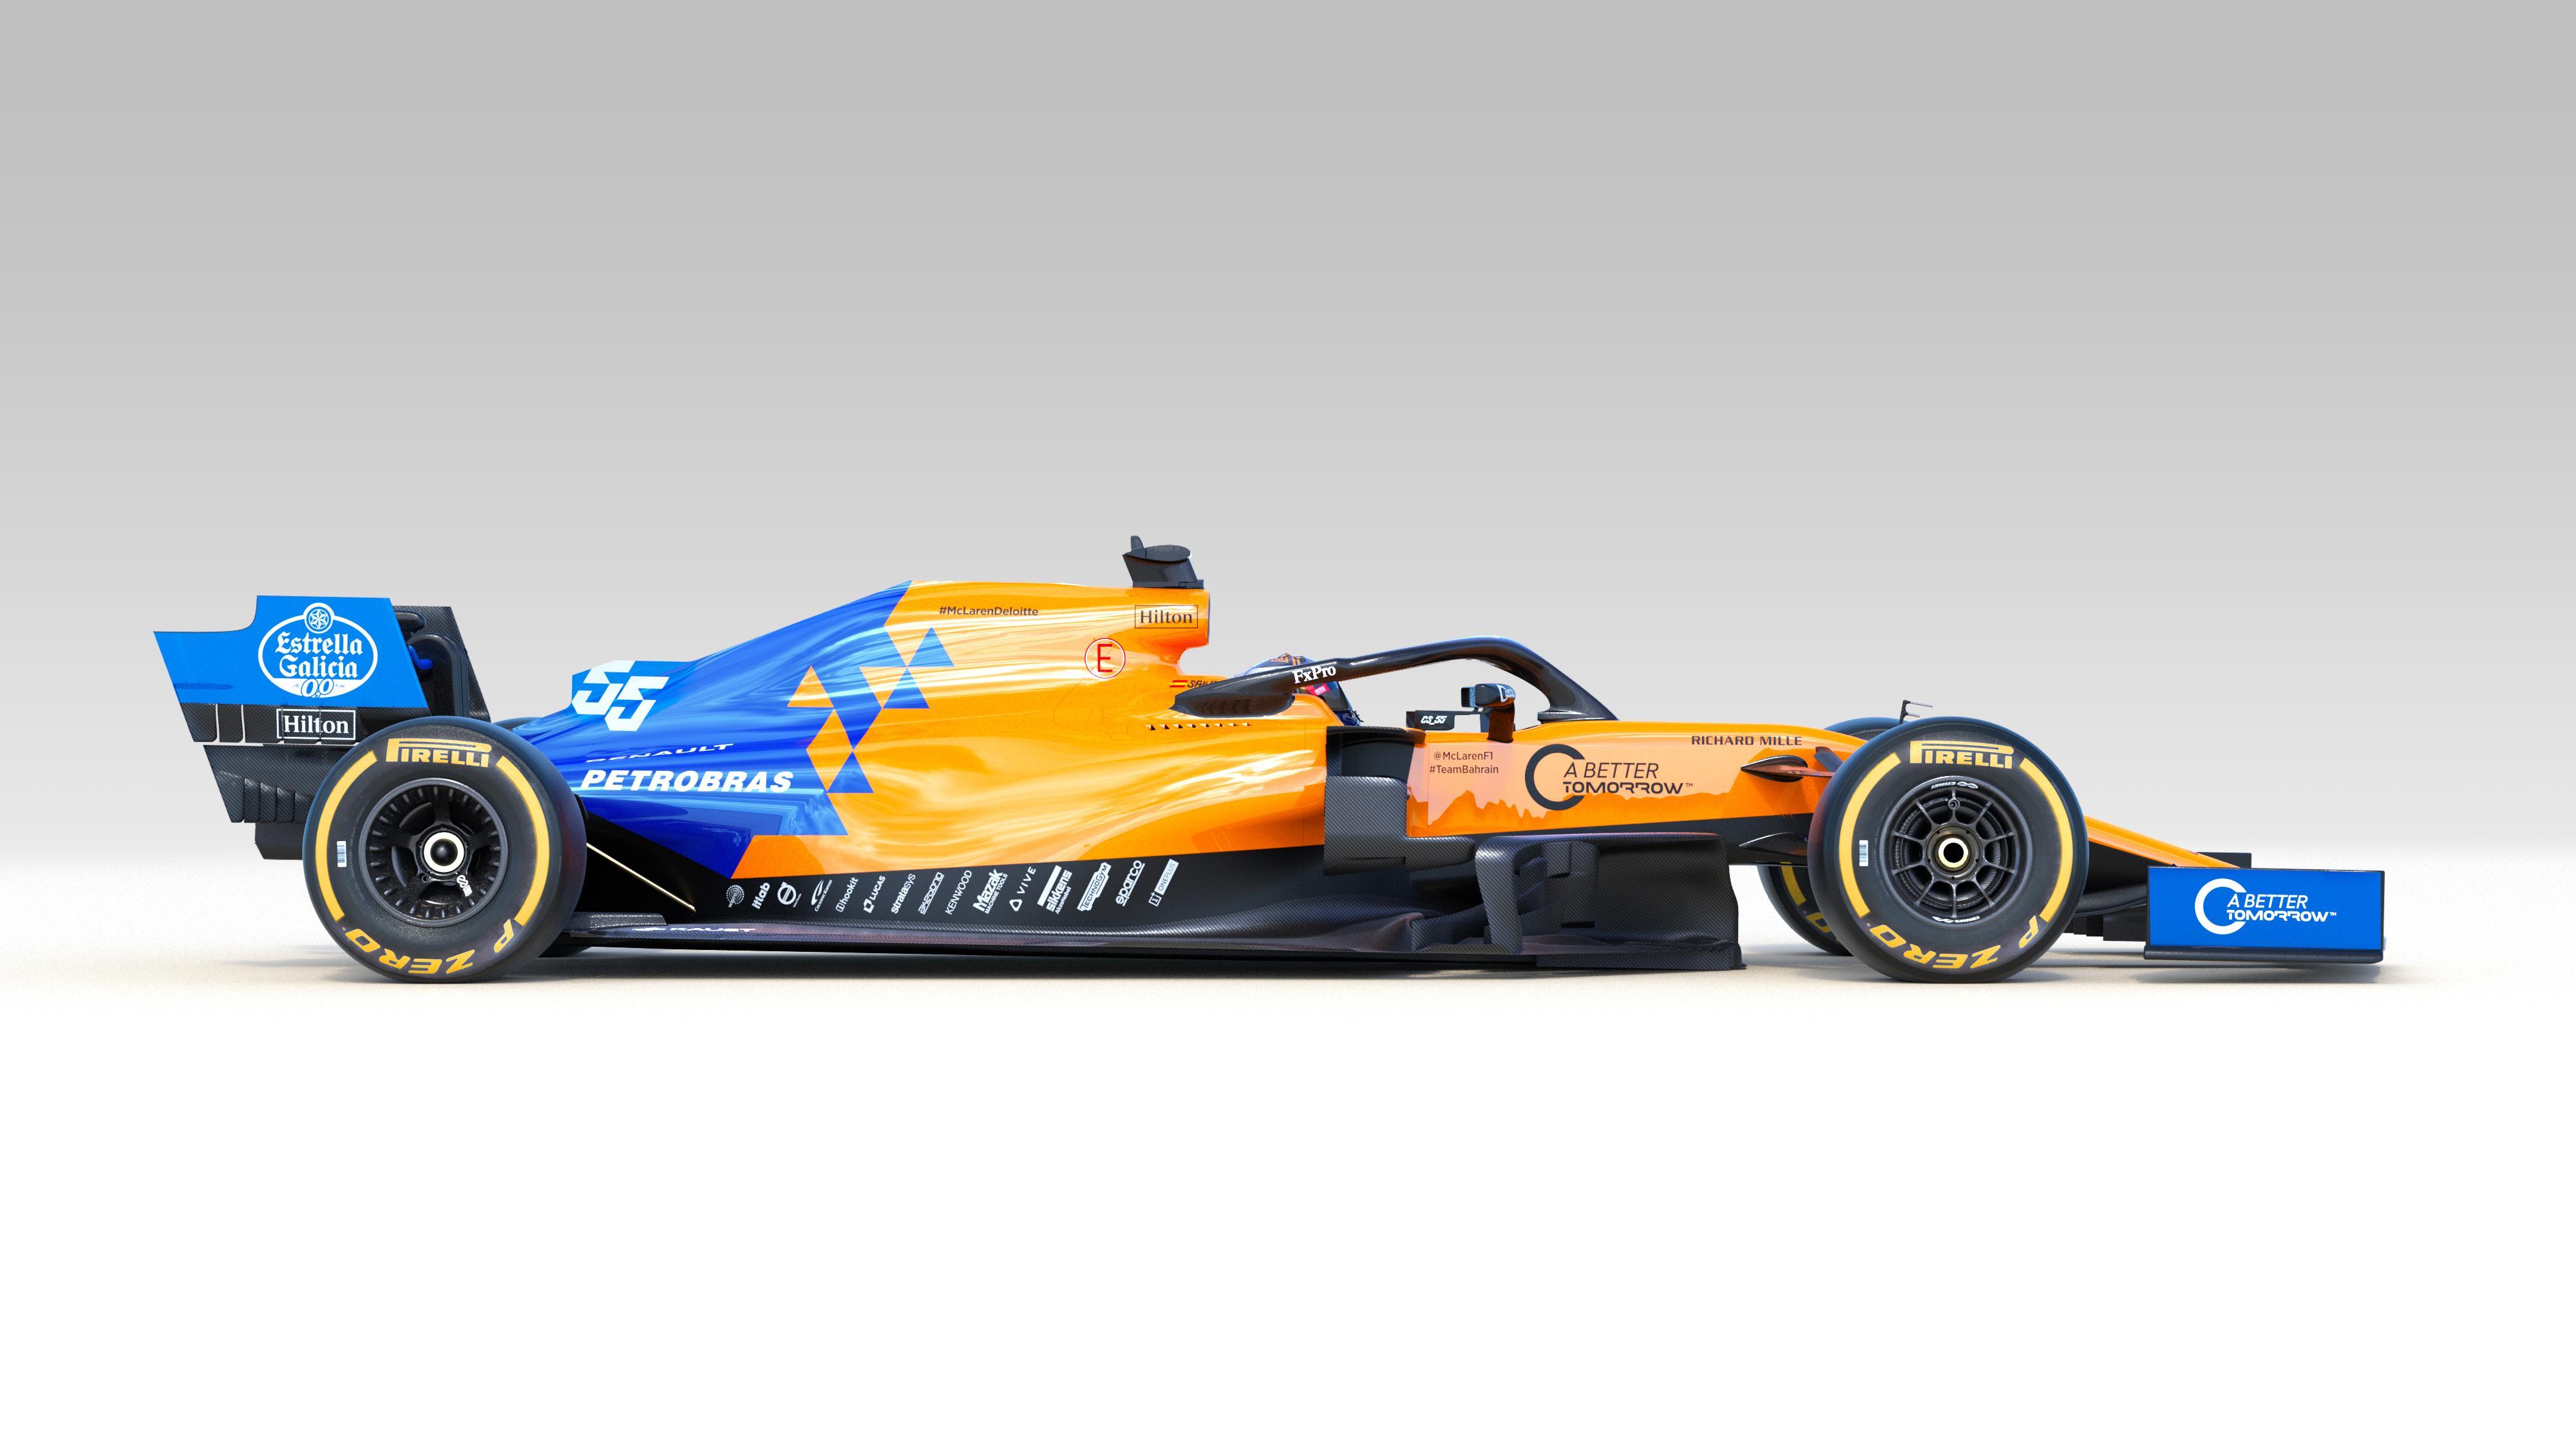 McLaren MCL34 gallery the angles of the teams 2019 F1 car